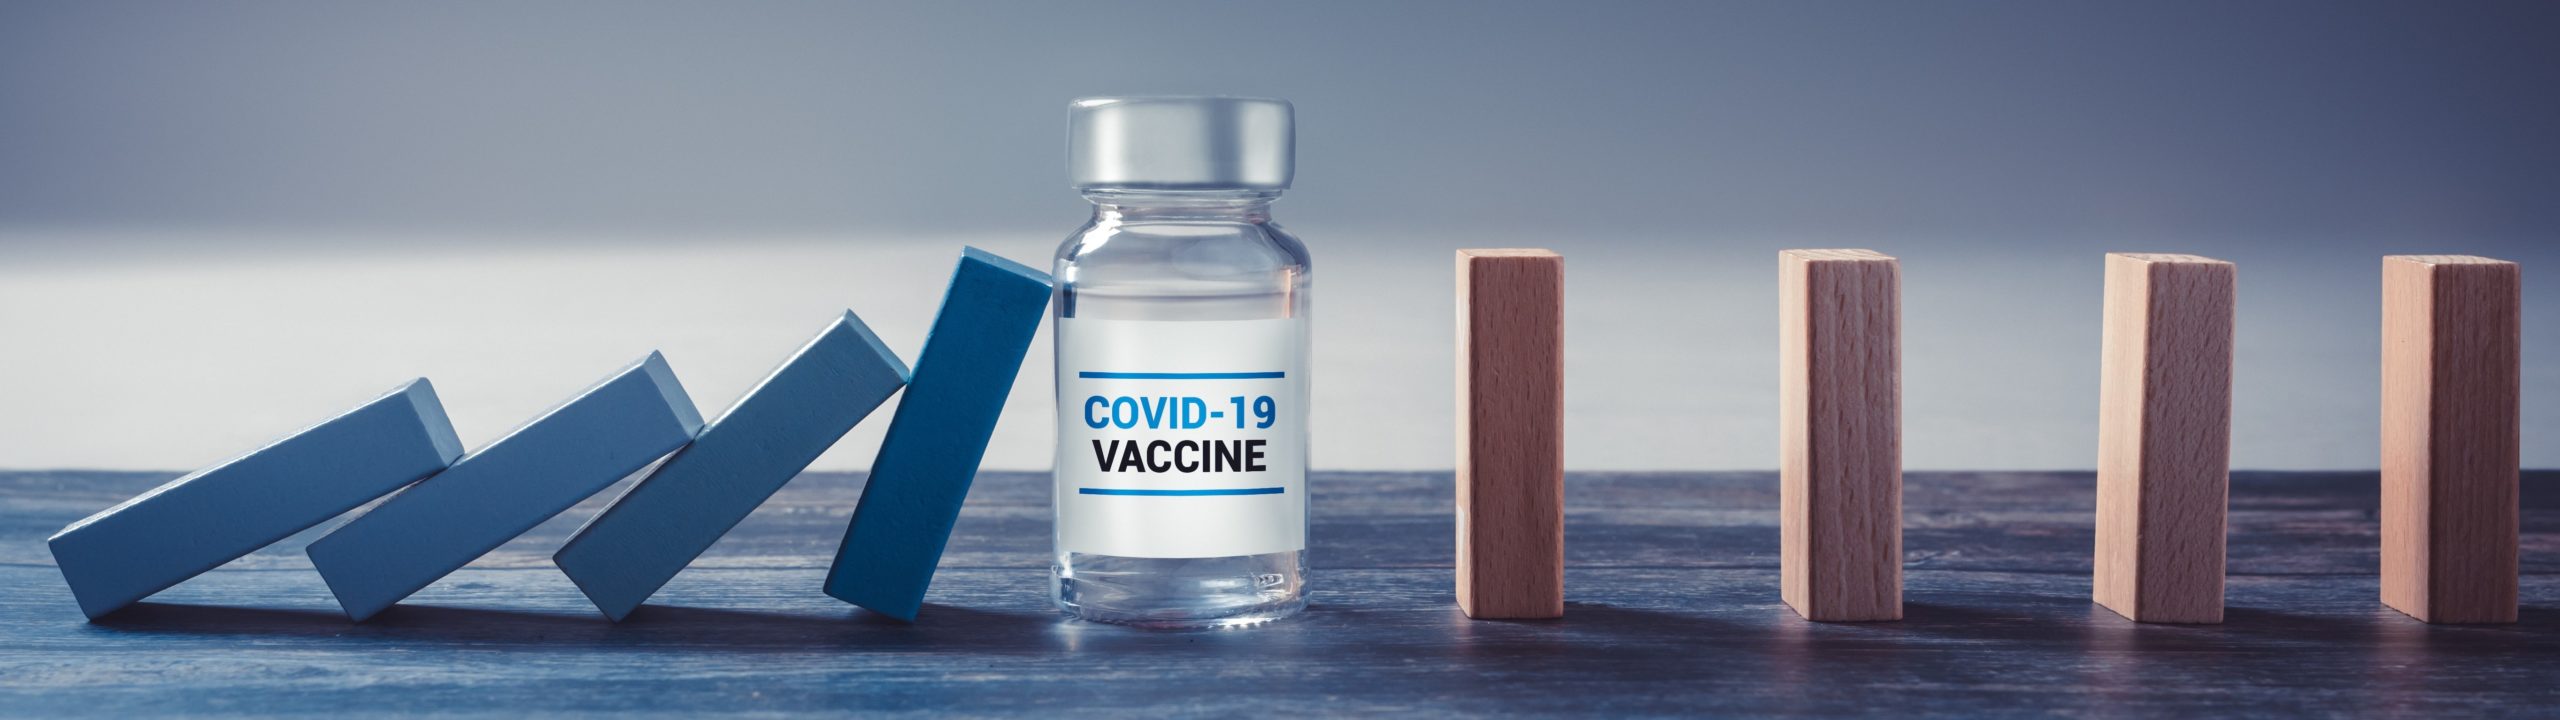 SIXTH CIRCUIT PRELIMINARILY UPHOLDS VACCINE MANDATE. WILL THE U.S. SUPREME COURT WEIGH IN?